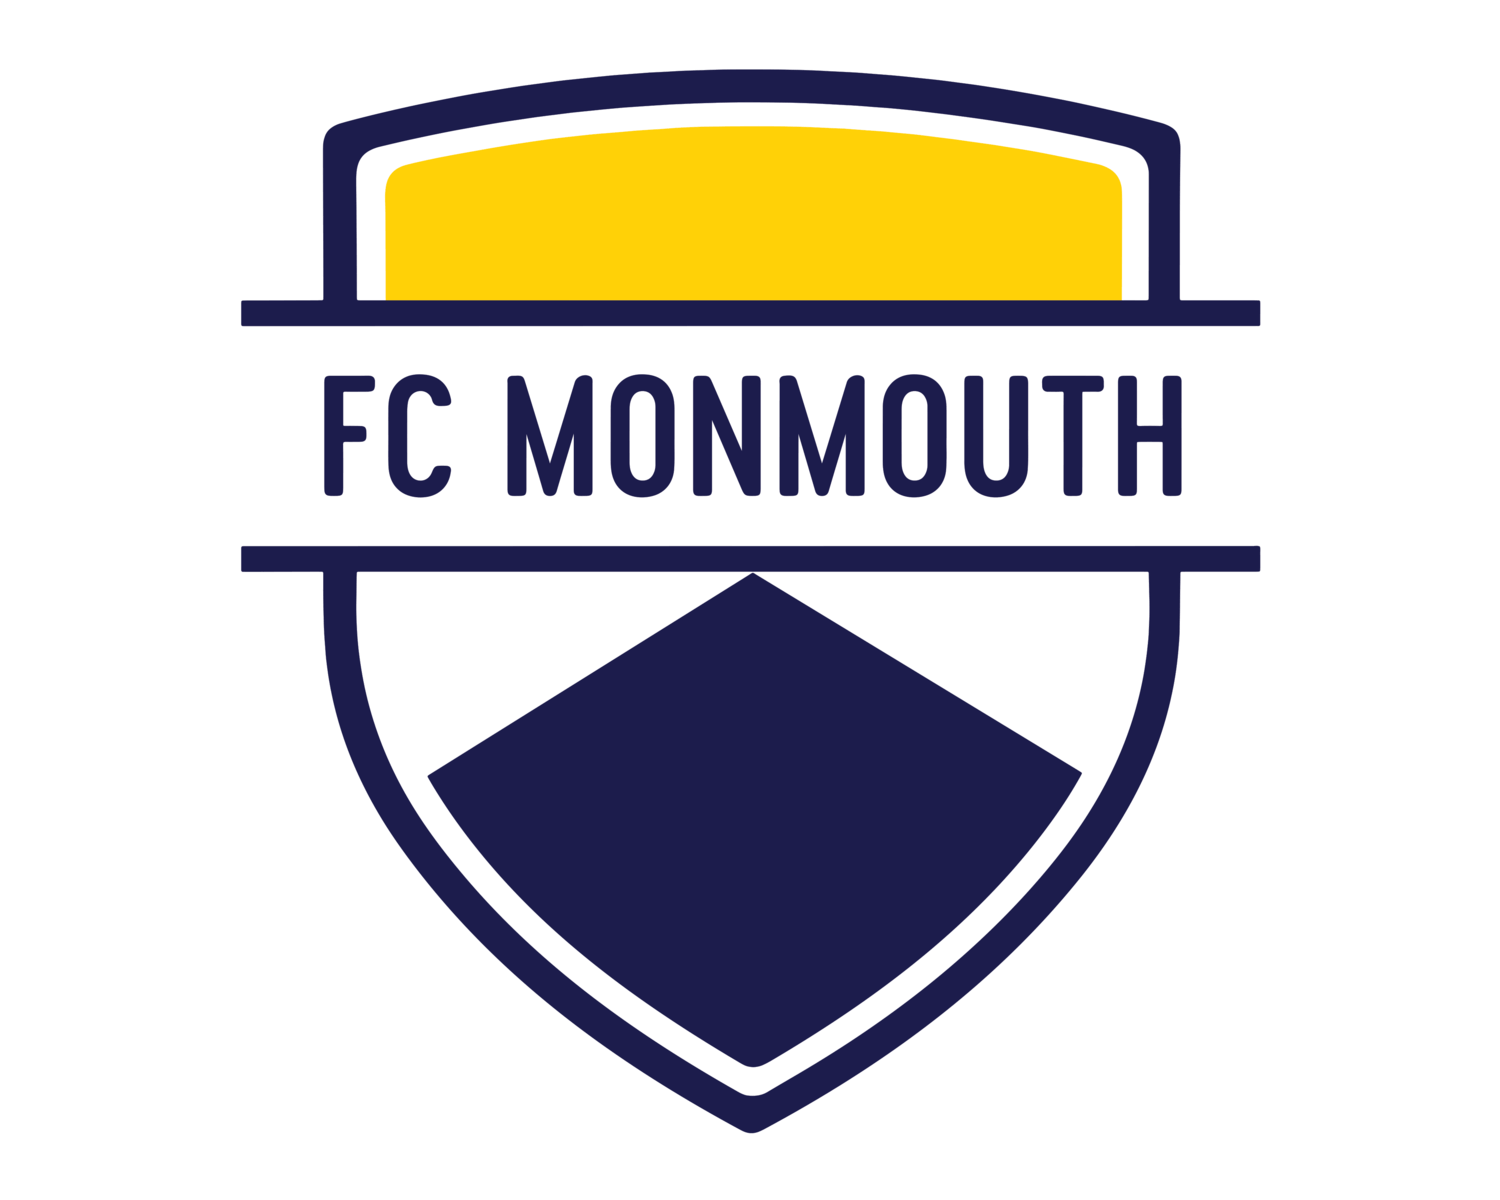 Monmouth Logo - FC Monmouth - We Are Monmouth